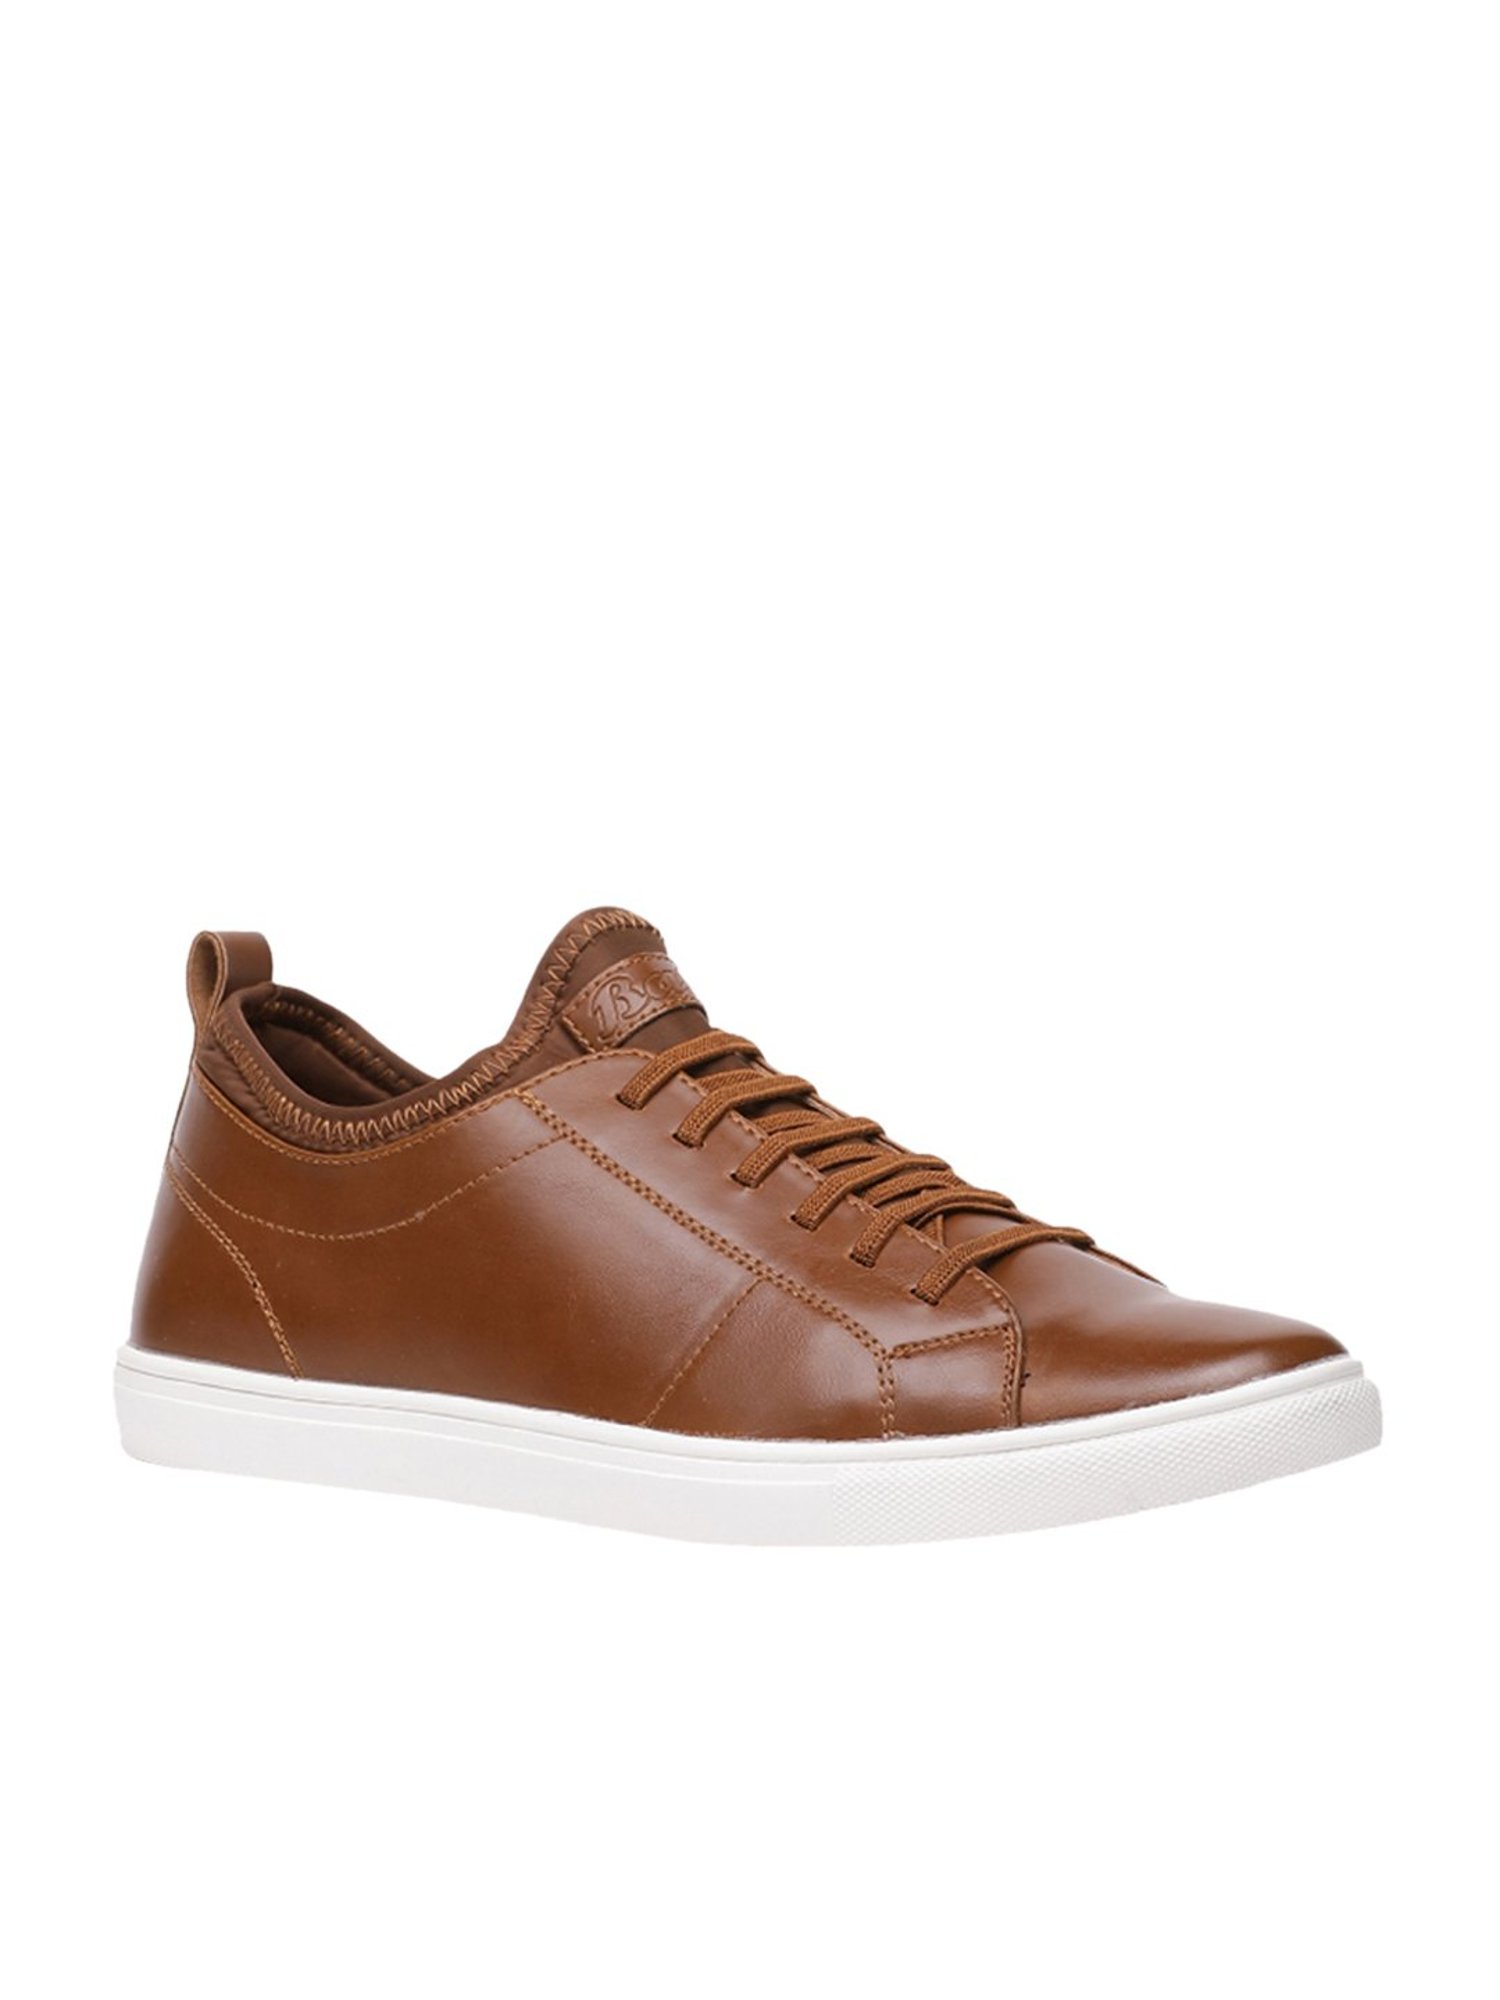 Brown Woven Leather Low Top Sneakers for Men by GentWith.com | Brown  leather sneakers, How to make brown, Brown leather shoes